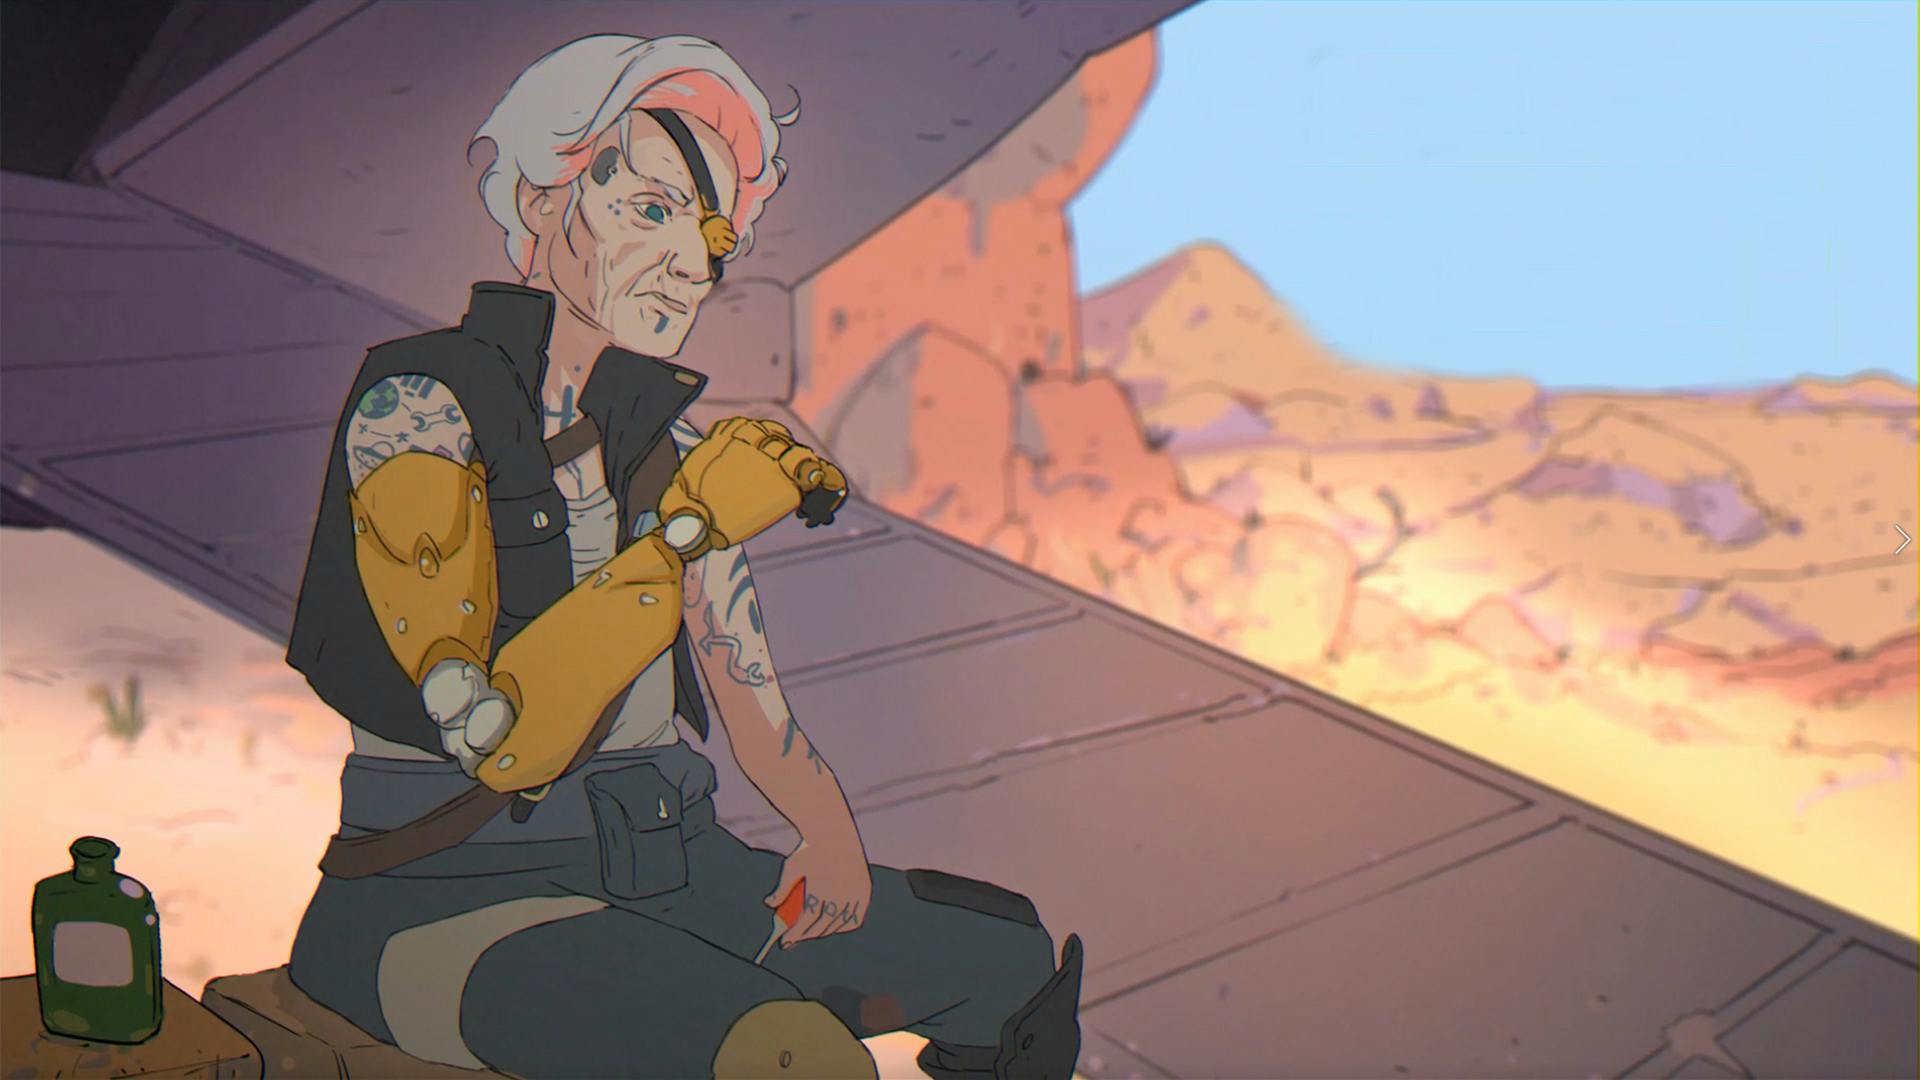 Space-punk character sitting in front of ship.